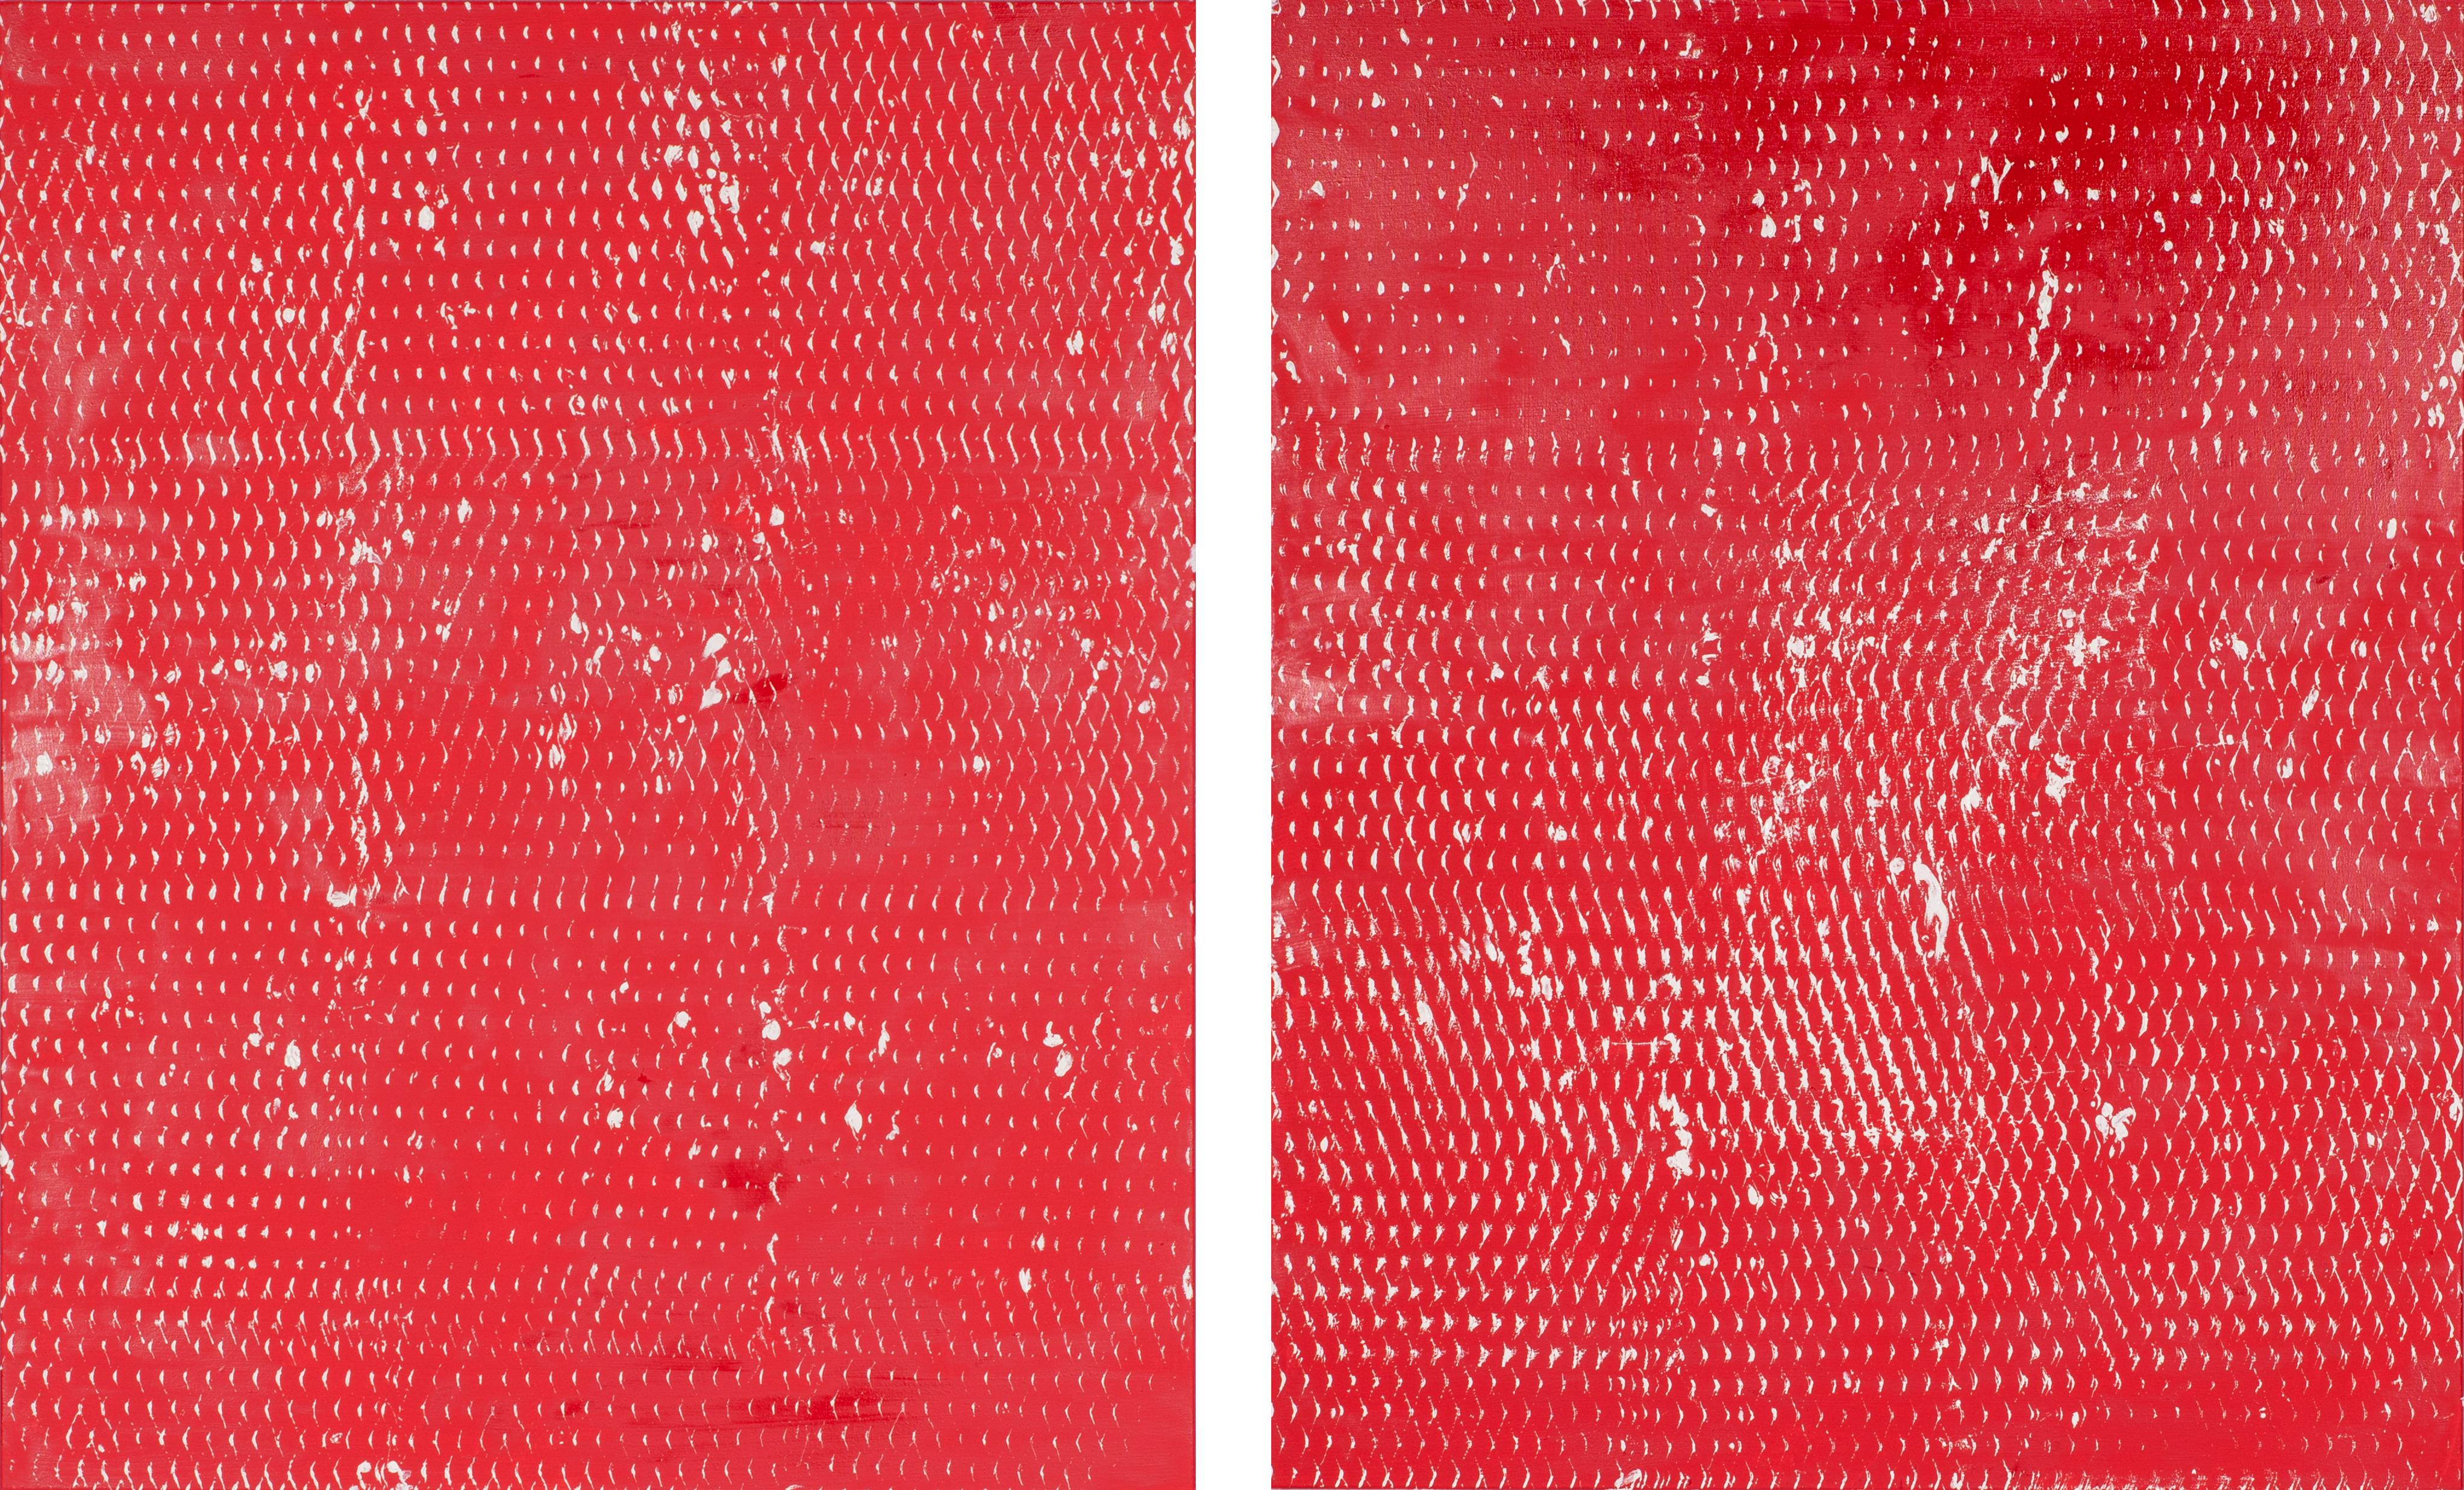 Clemens Wolf Still-Life Painting - Red and White II and III, Expanded Metal Painting. Diptych